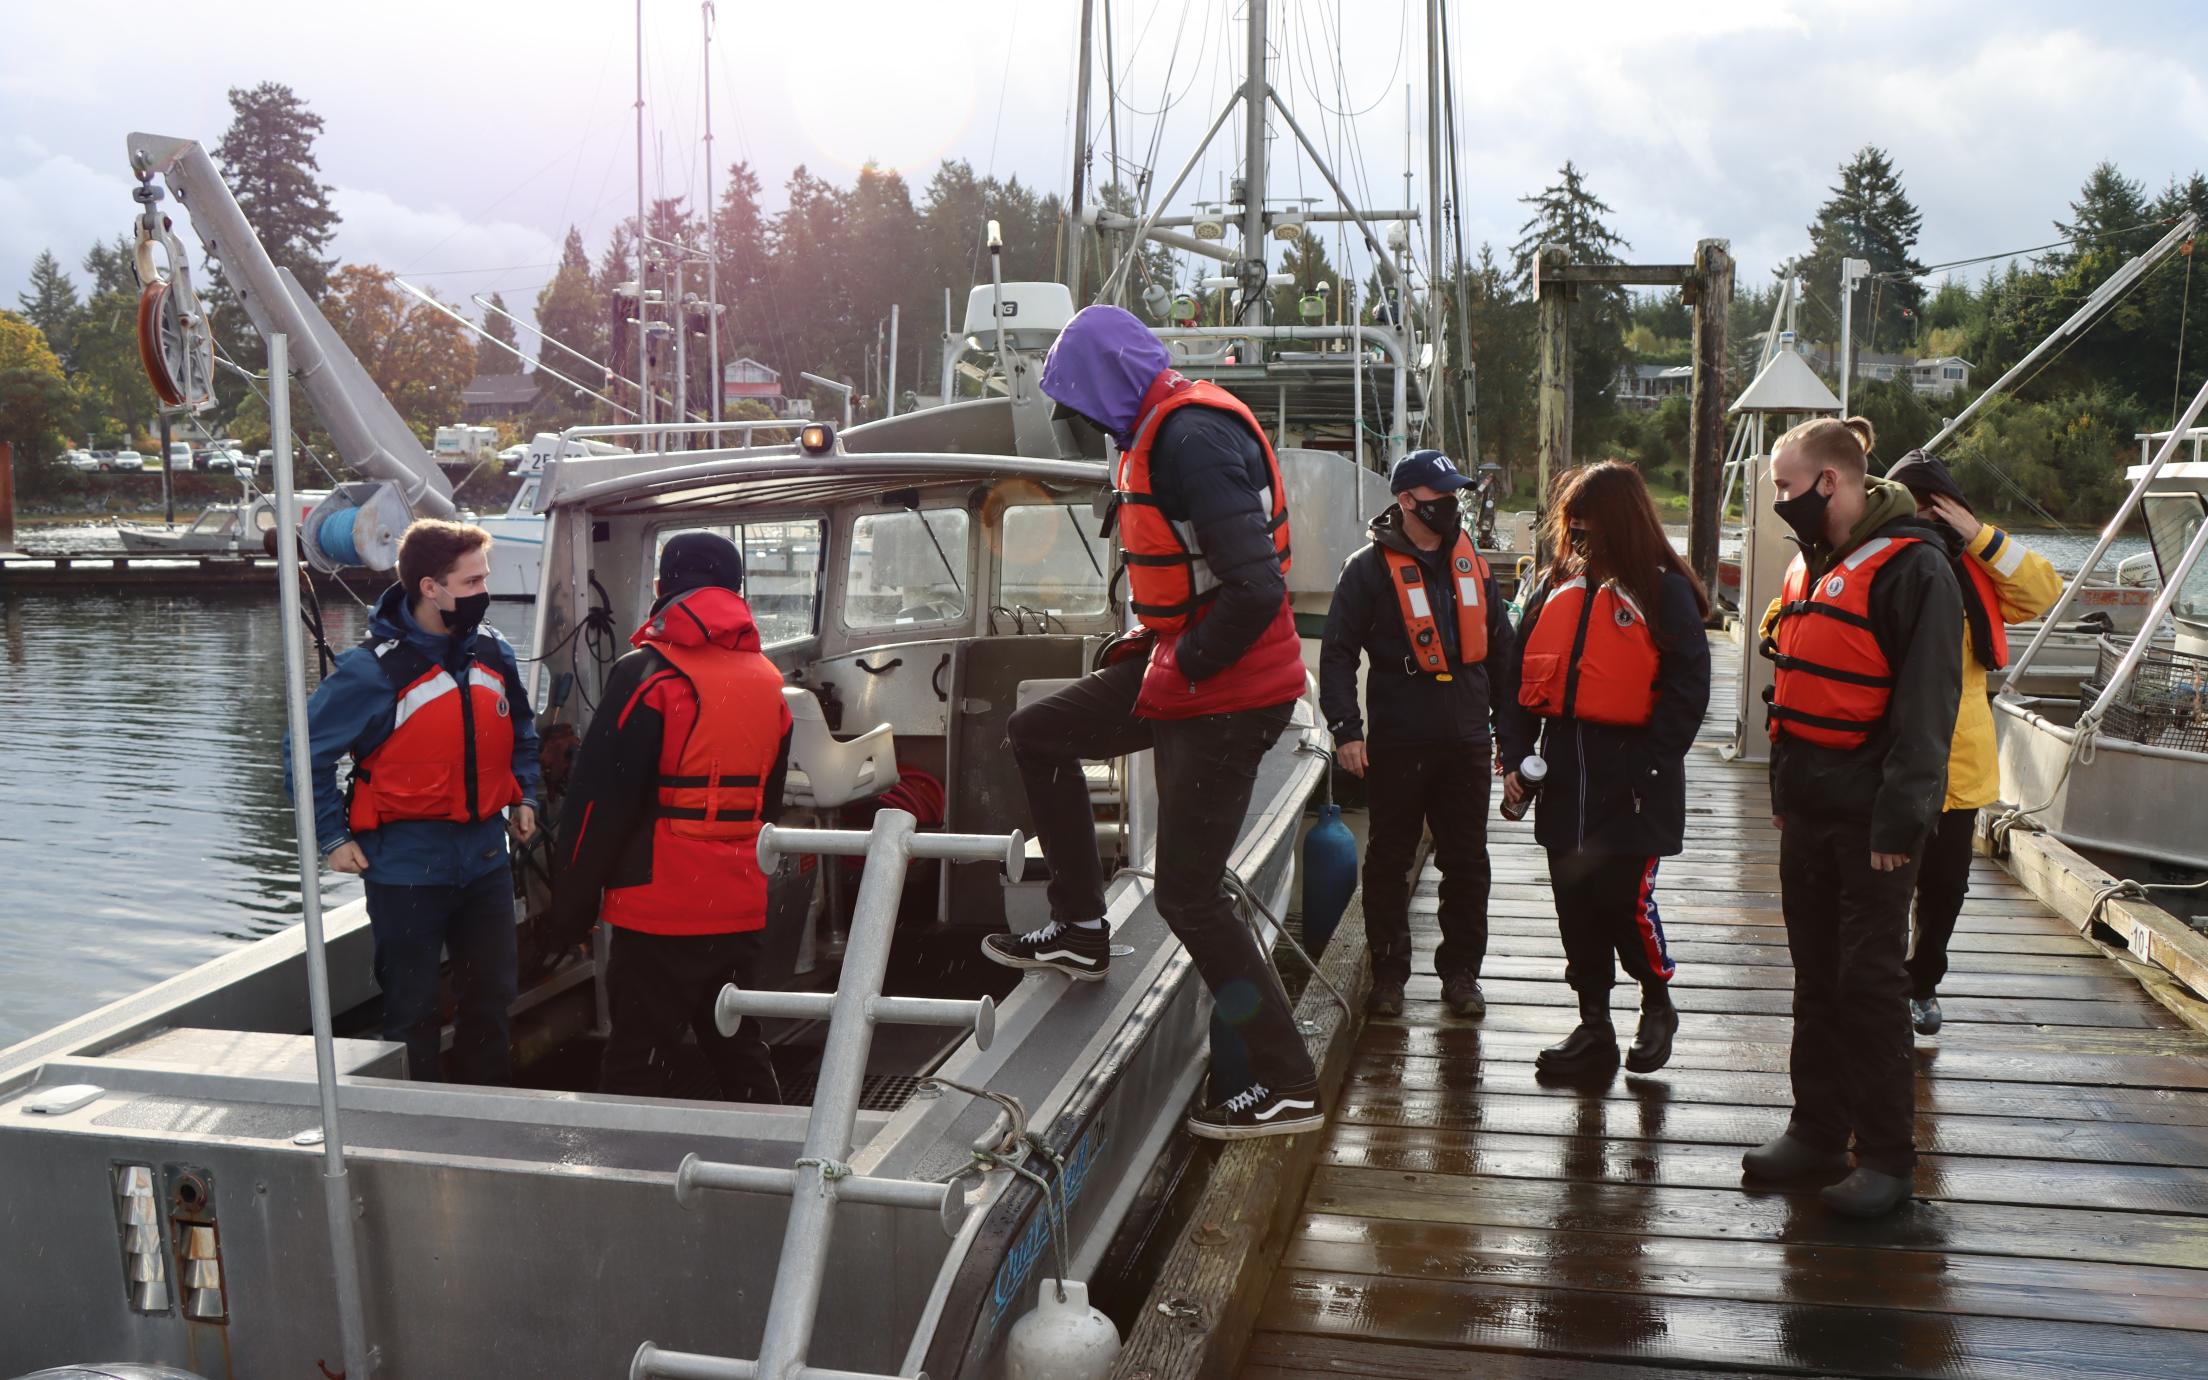 VIU students in front of boat